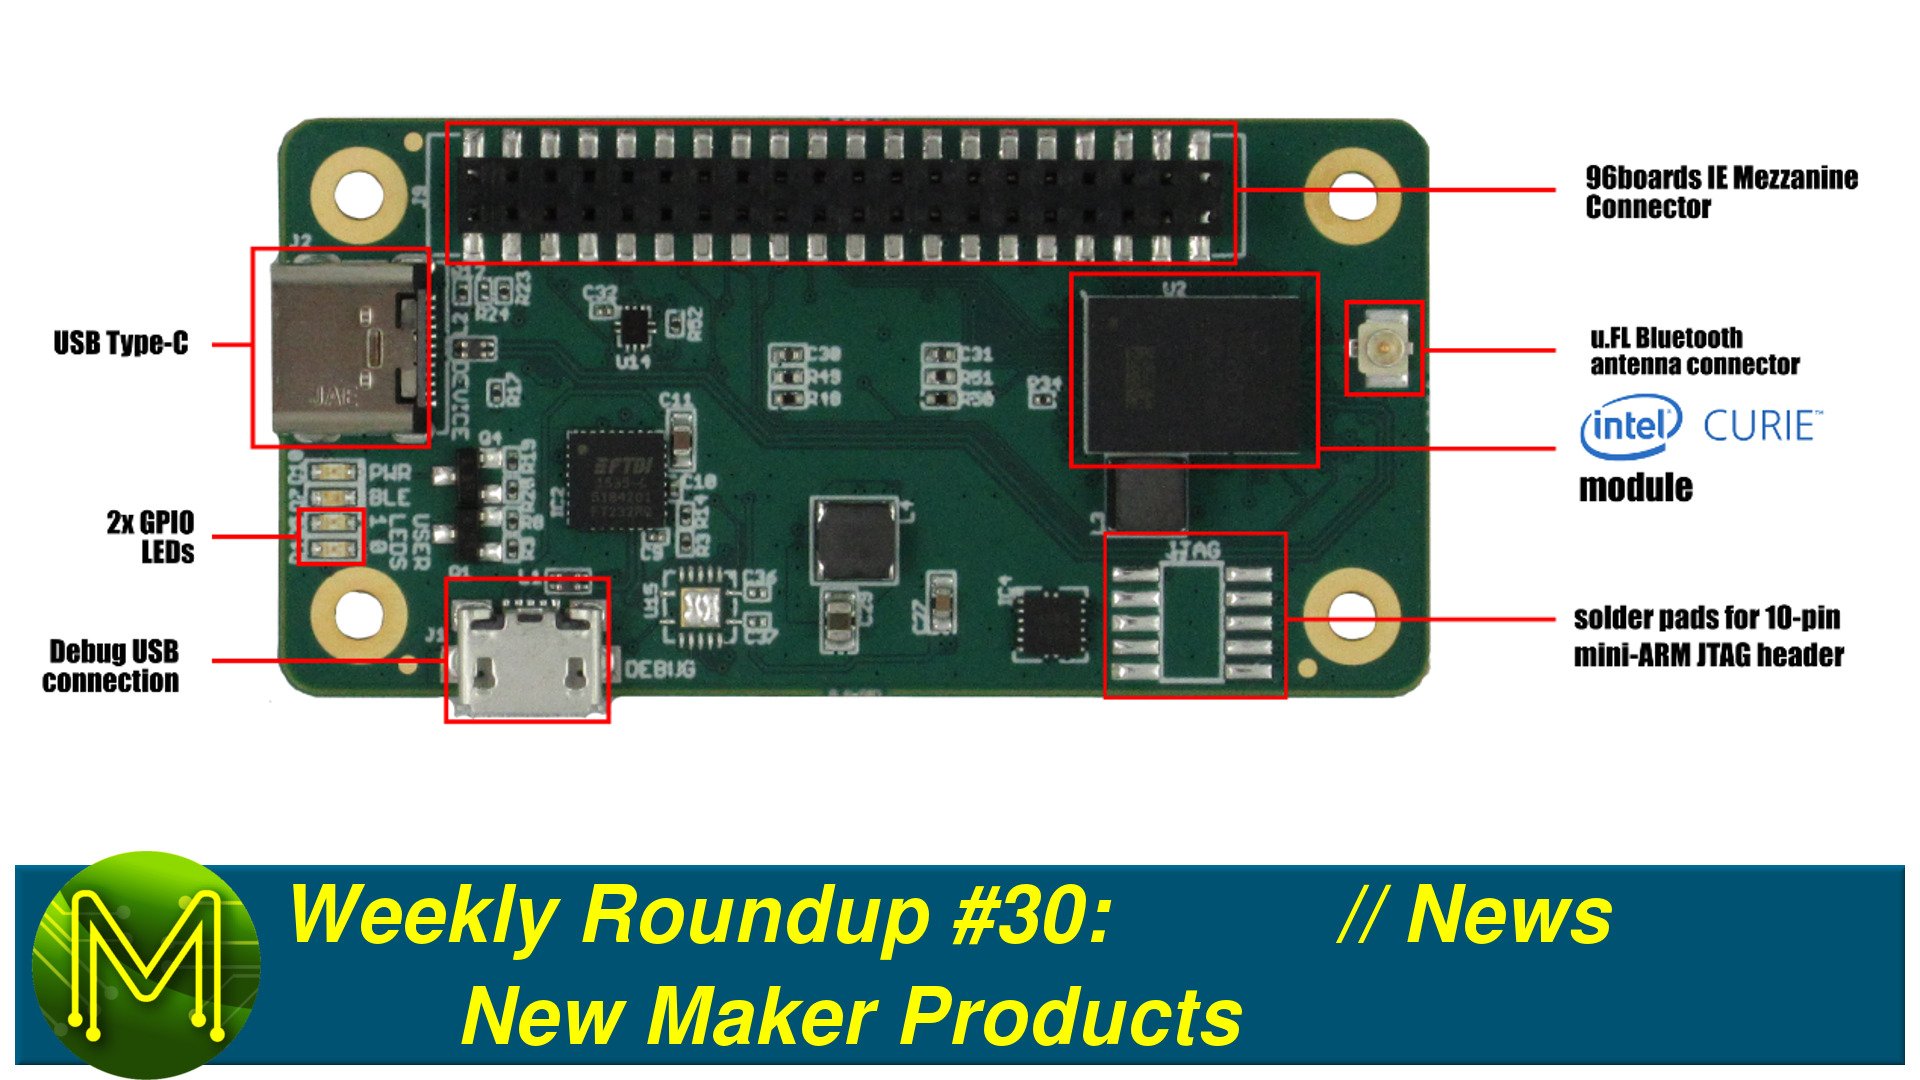 Weekly Roundup #30 - New Maker Products // News